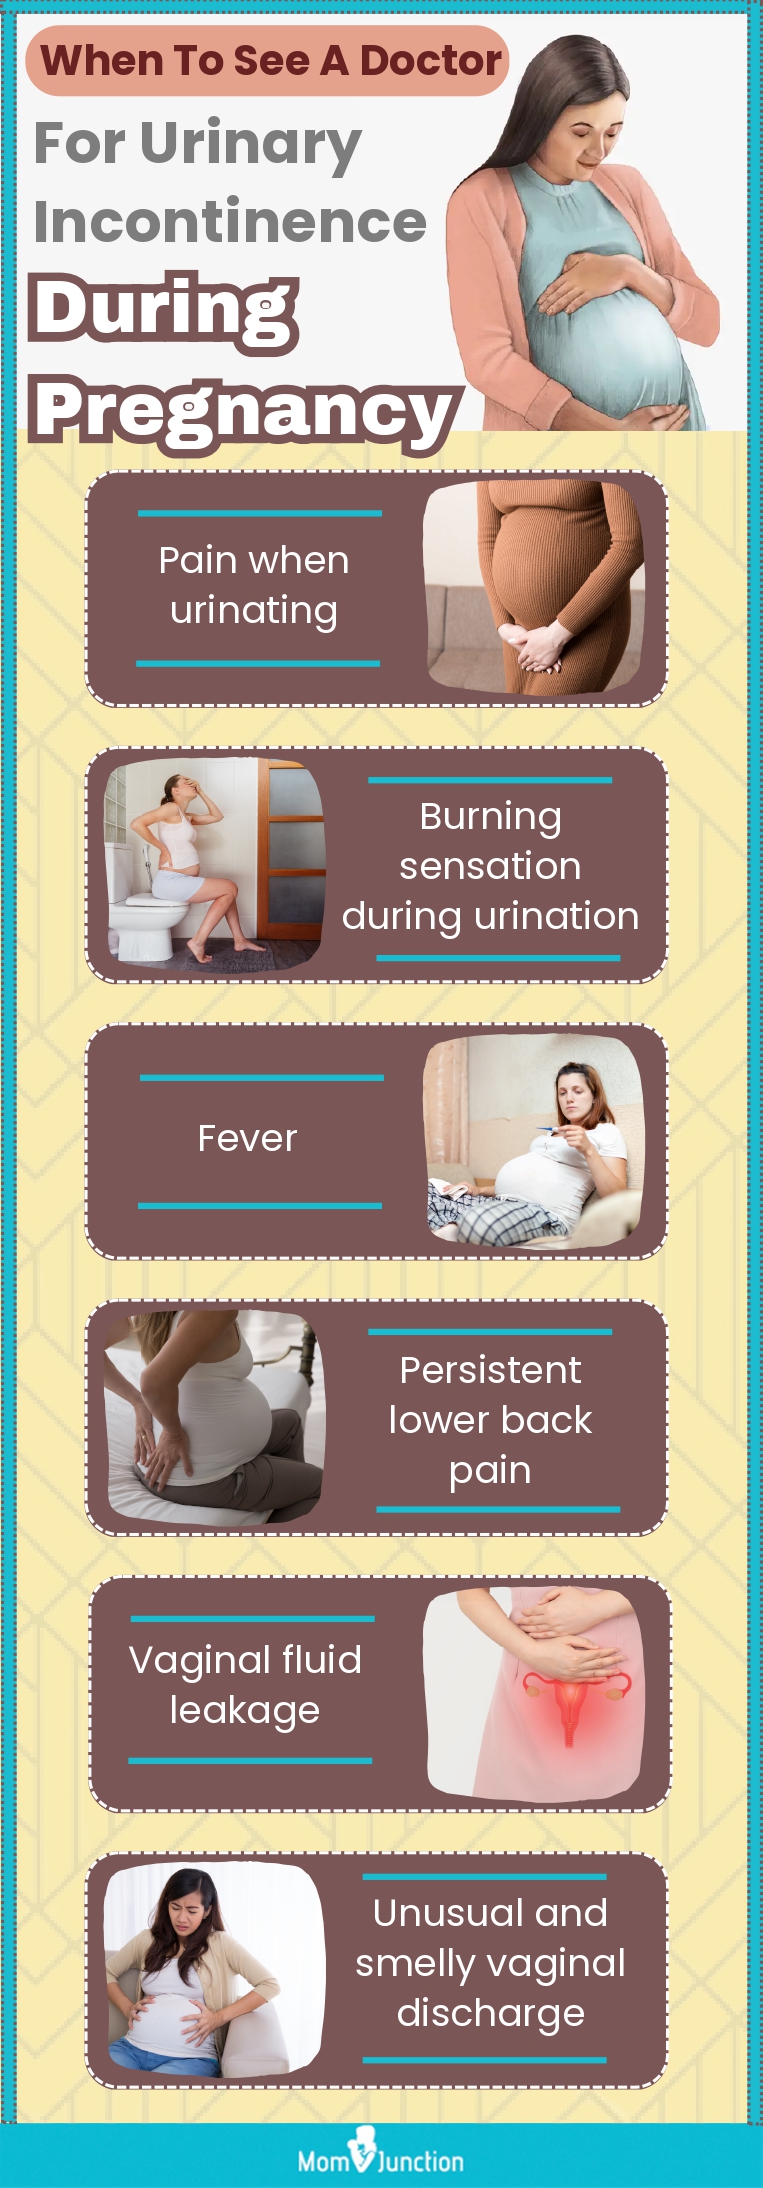 https://cdn2.momjunction.com/wp-content/uploads/2023/06/When-To-See-A-Doctor-For-Urinary-Incontinence-During-Pregnancy.jpg